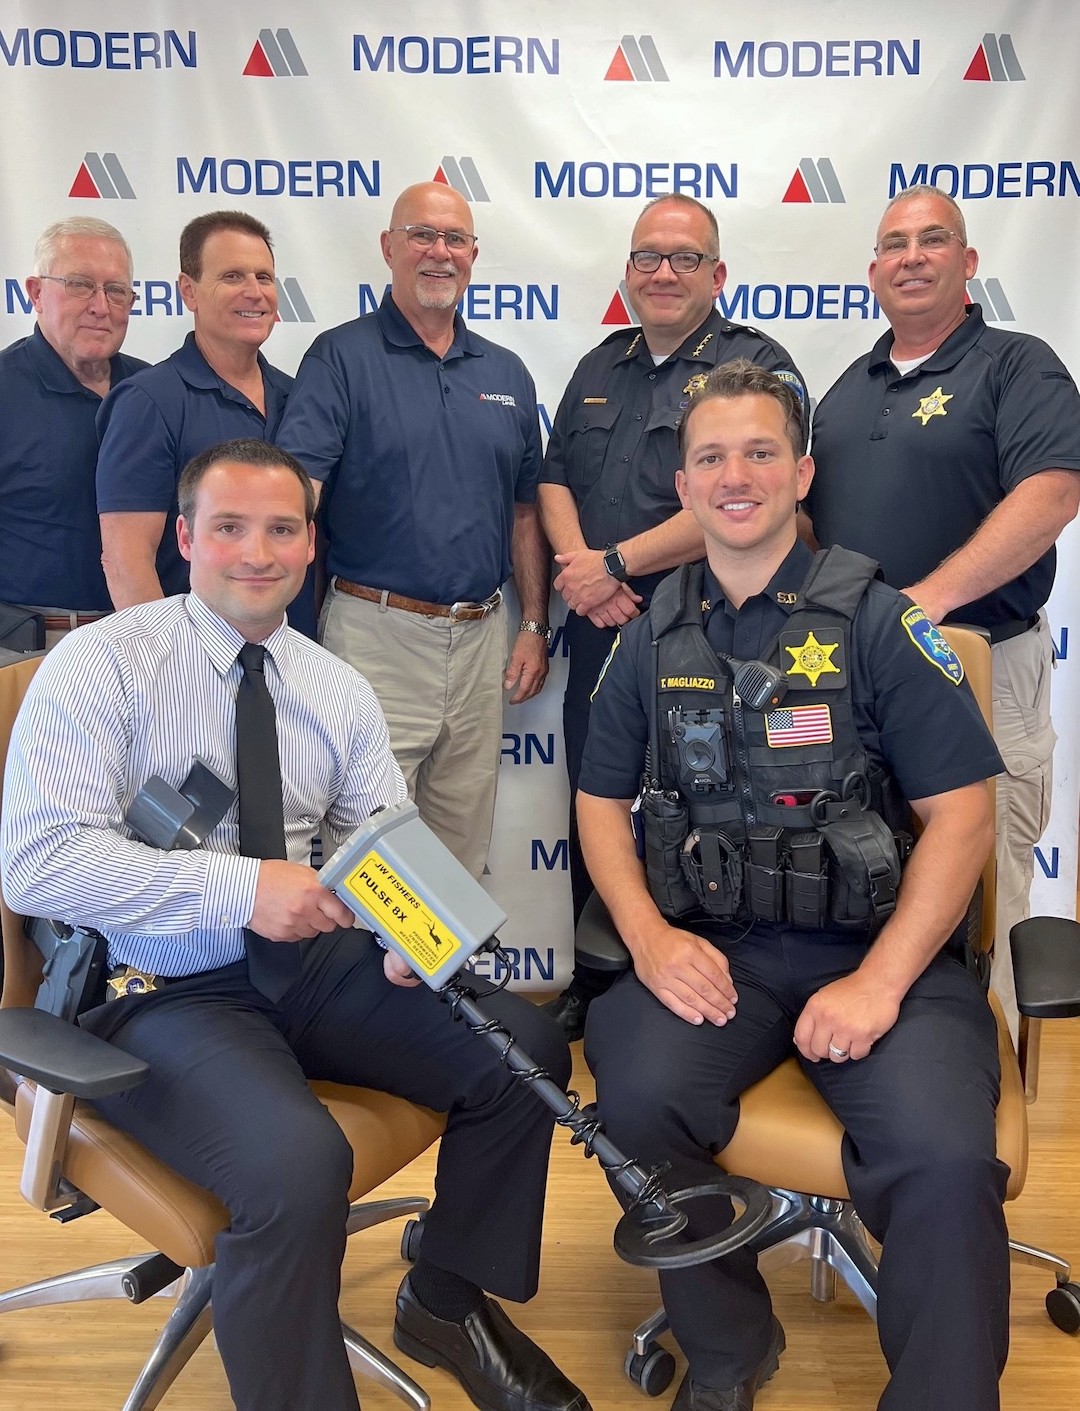 Pictured, back row: Niagara County District 3 Coroner James Carroll, Robert Trunzo and Mike McInerney with Modern Disposal gather with Sheriff Michael Filicetti and Lt. James Lucas. Front row: Investigator Keith Hetrick and Deputy Tyler Magliazzo from the underwater recovery team.